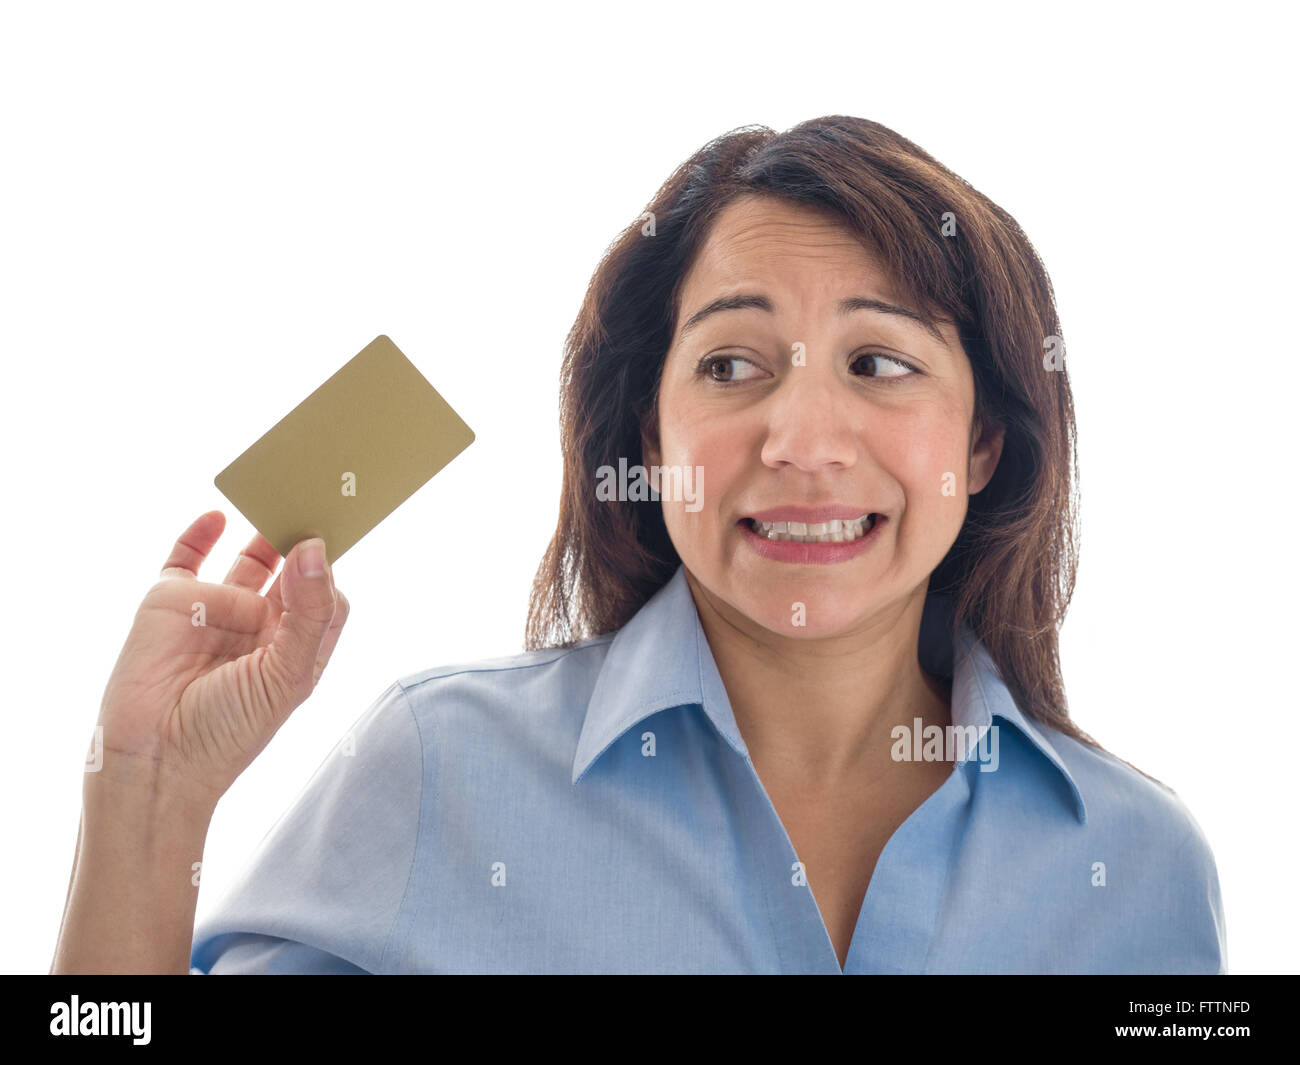 A young mixed race woman has misgivings about a credit card or gift card. Stock Photo